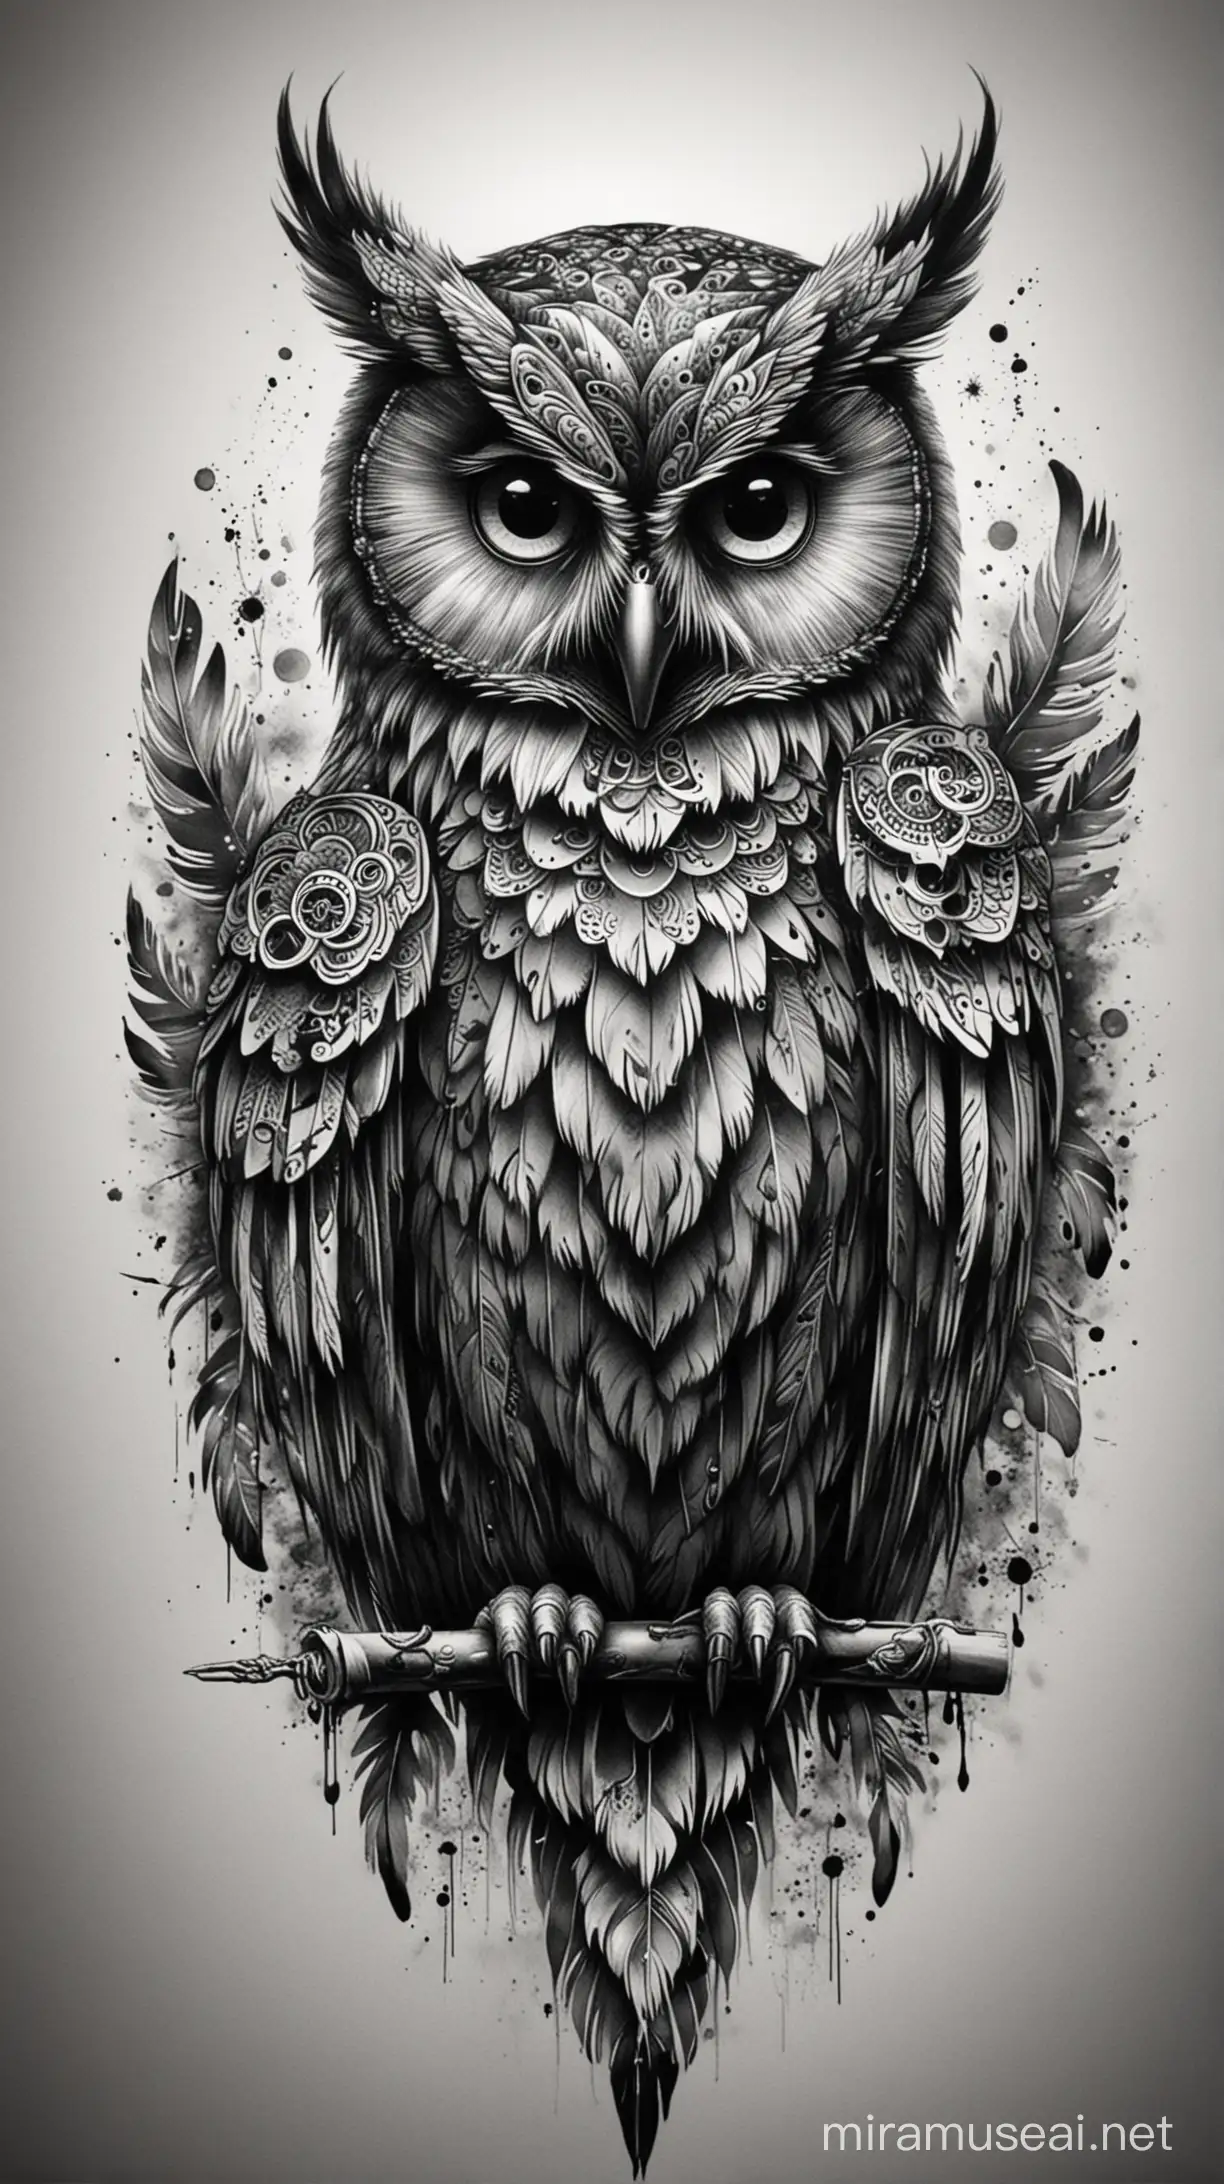 an owl with metal feathers art black and white tattoo